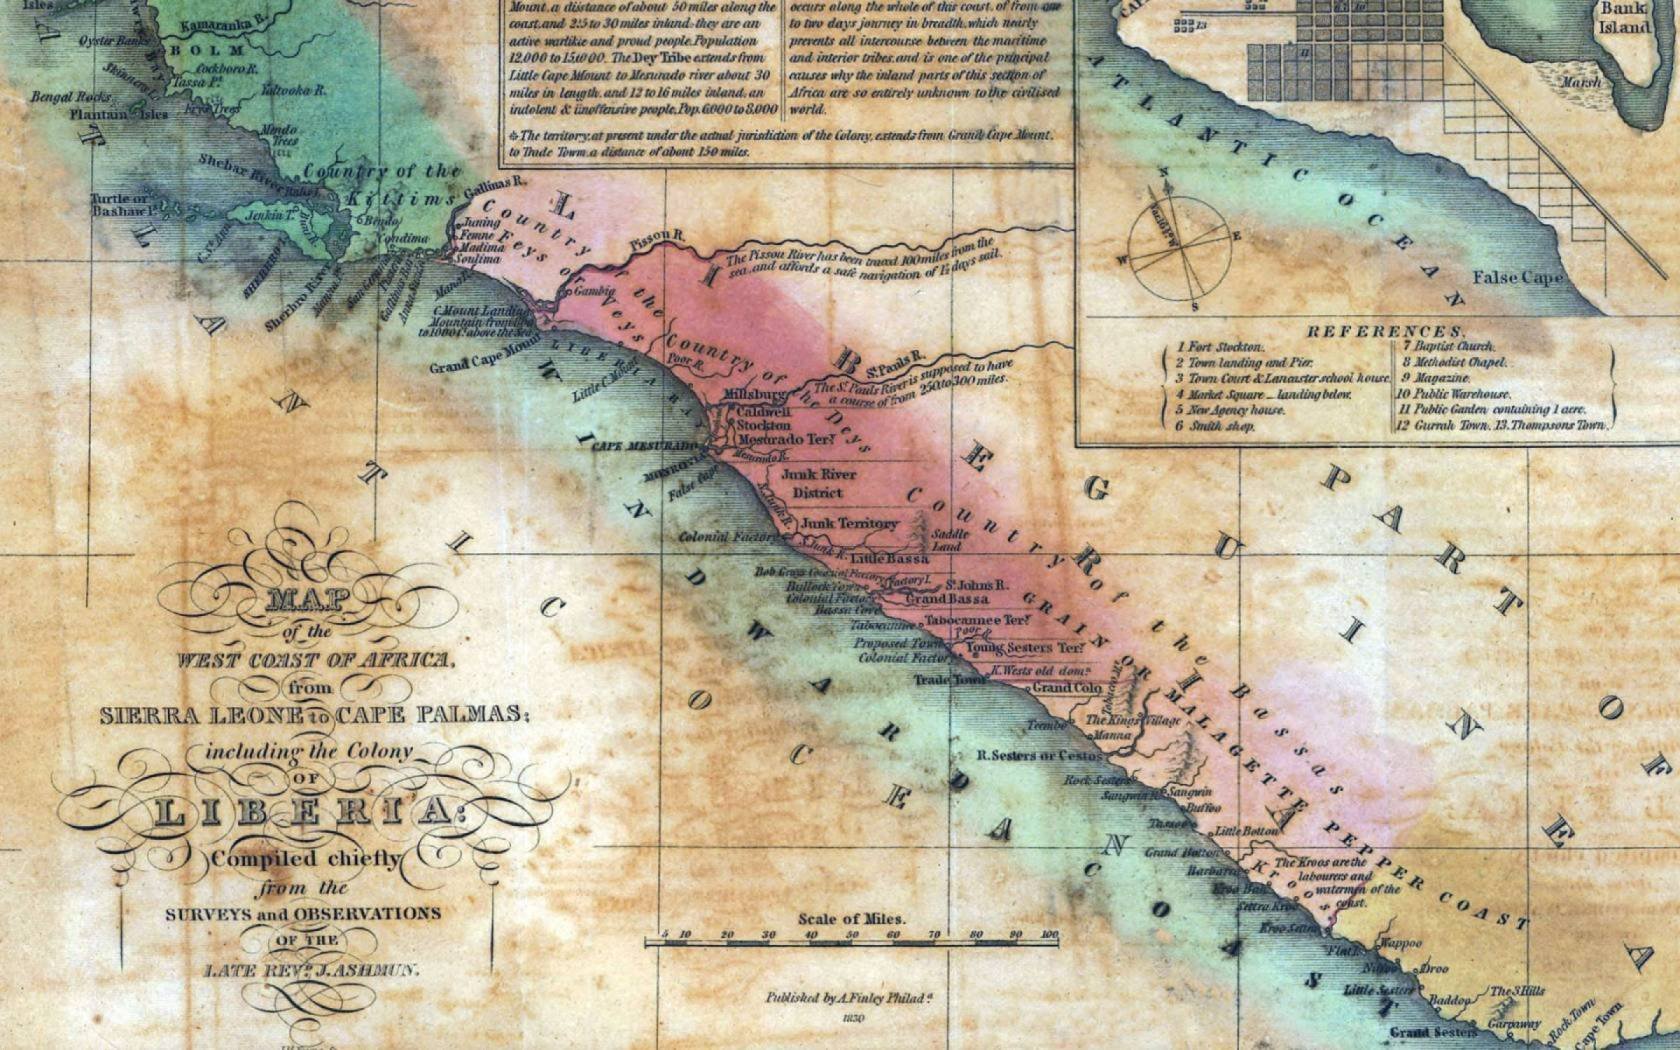 An American map of the West Coast of Africa from Sierra Leone to Cape Palmas, 'including the colony of Liberia'.